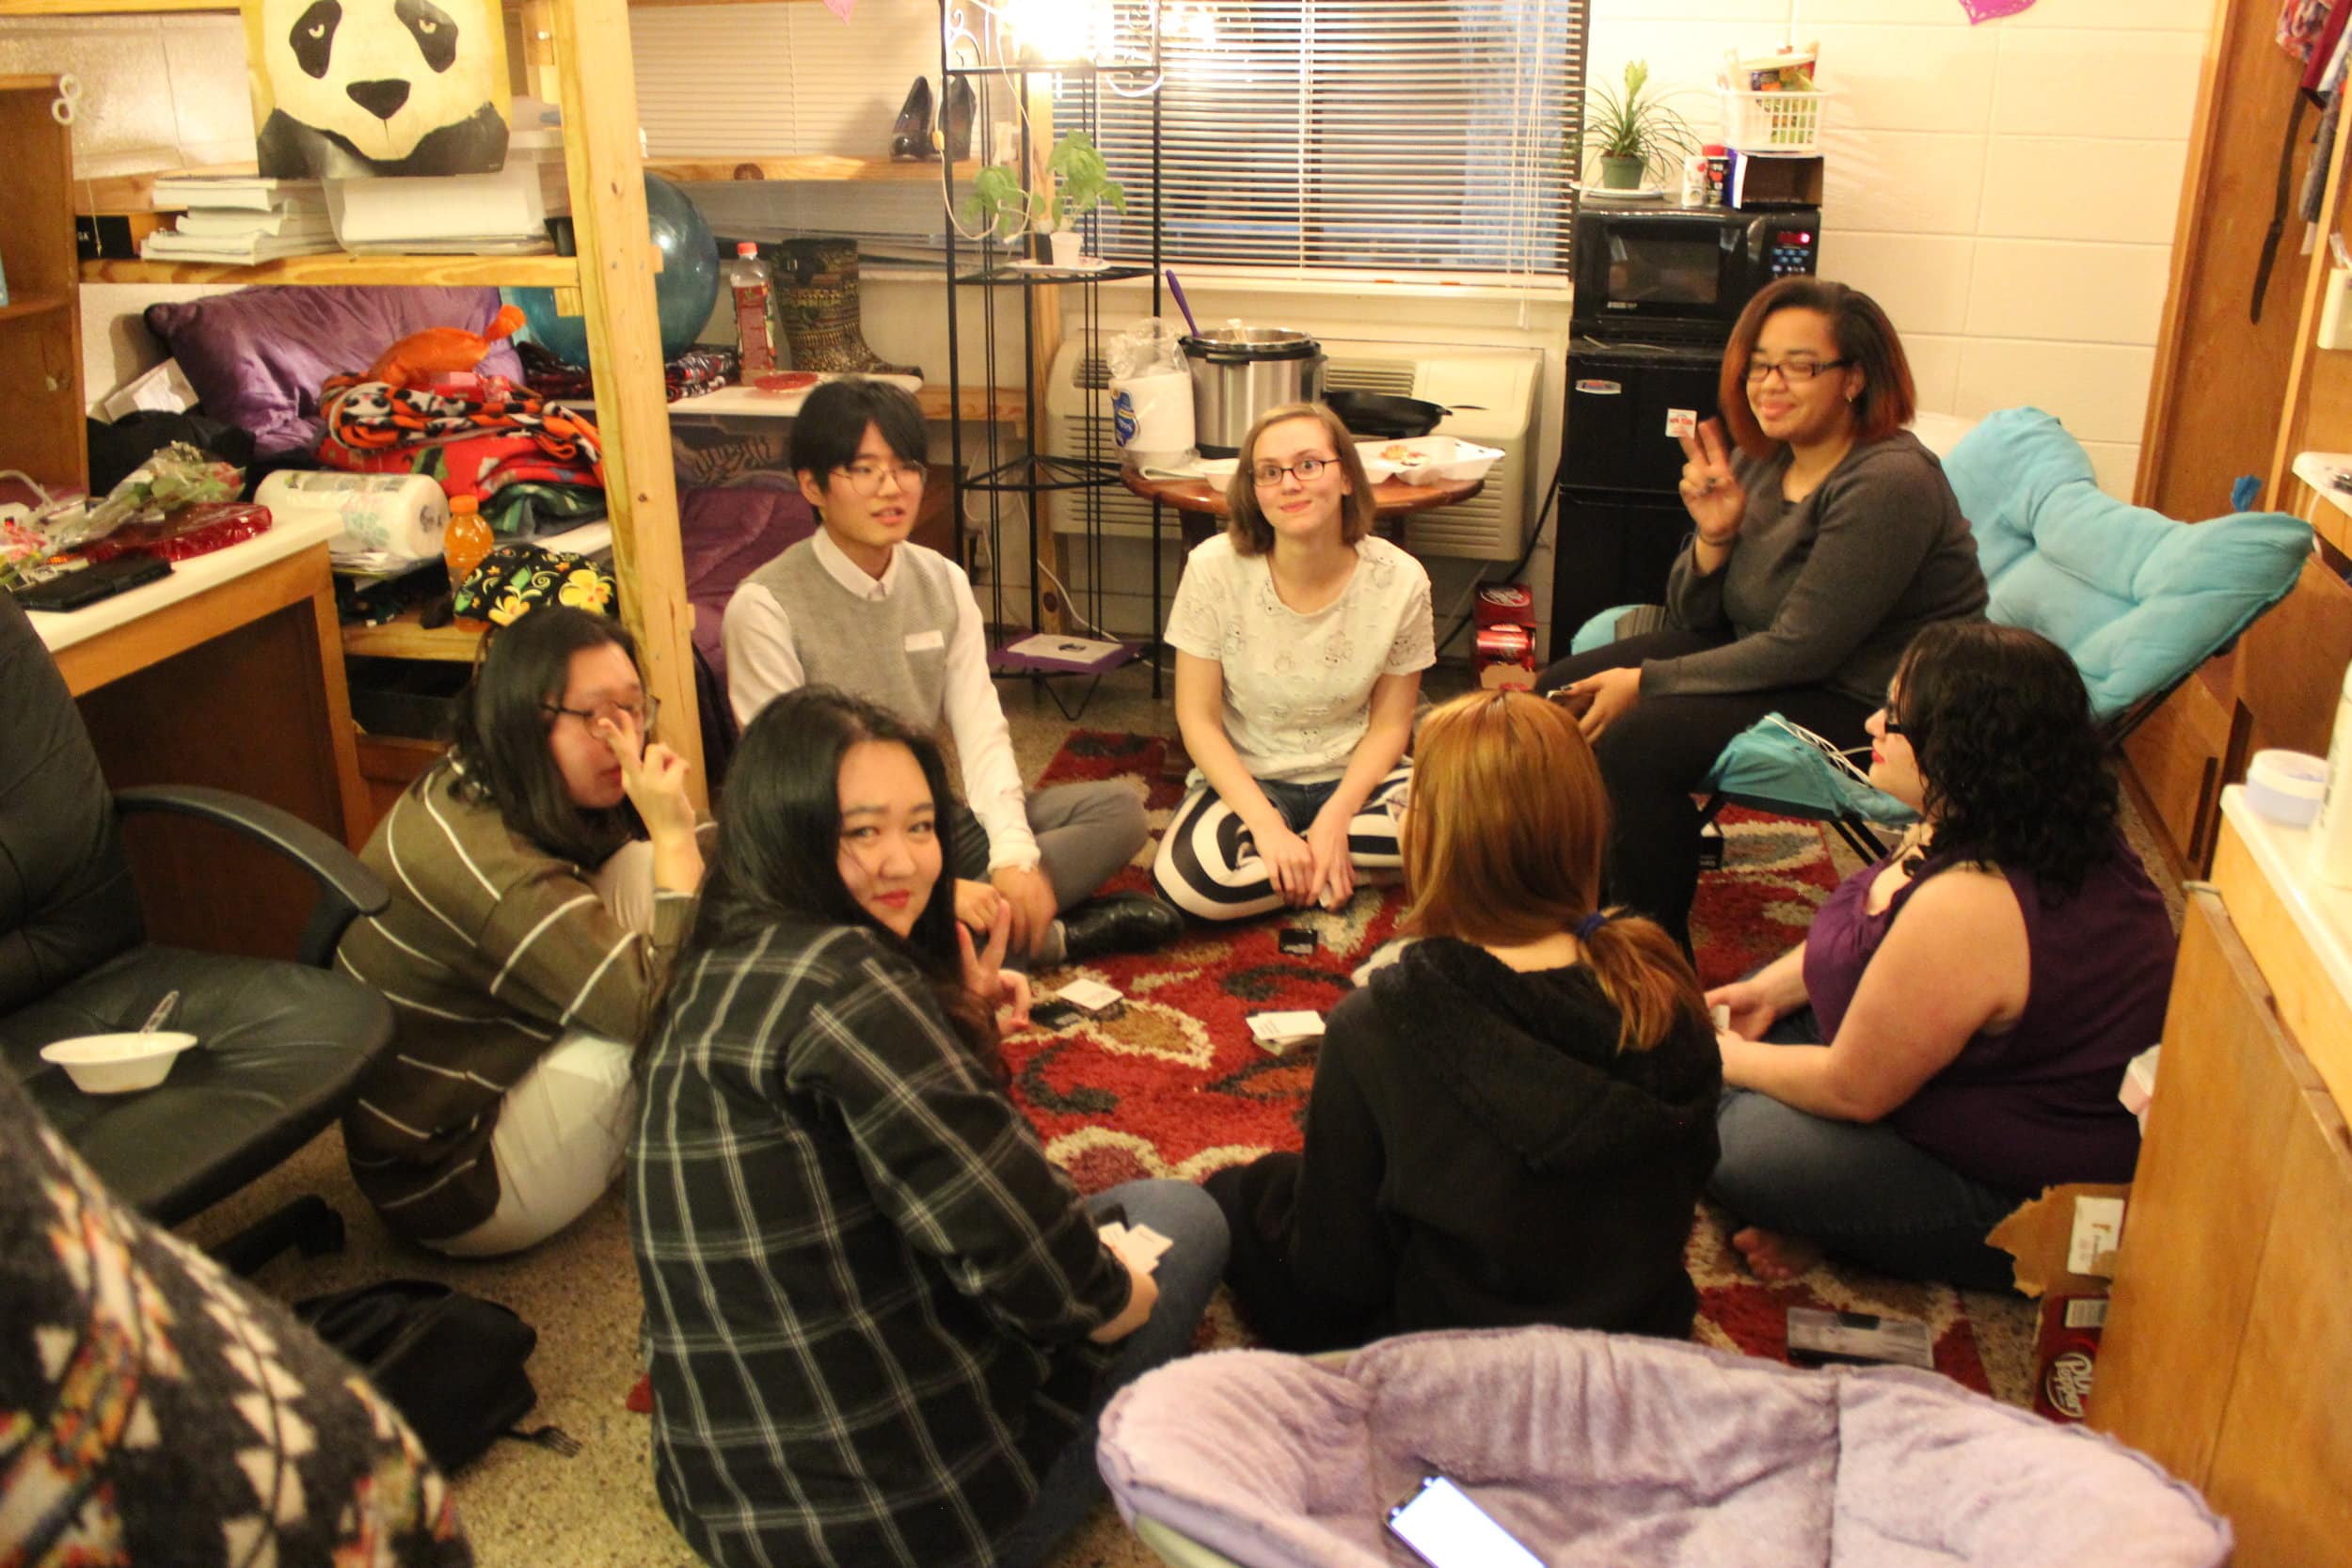 Nisa Navarro, an interdisciplinary English and communication major, Hannah Bate, a linguistics and English major, Ashia Davenport, a criminal justice and linguistics major and their guests Lily, Shawn, and Nancy enjoy the open dorms with a card game.